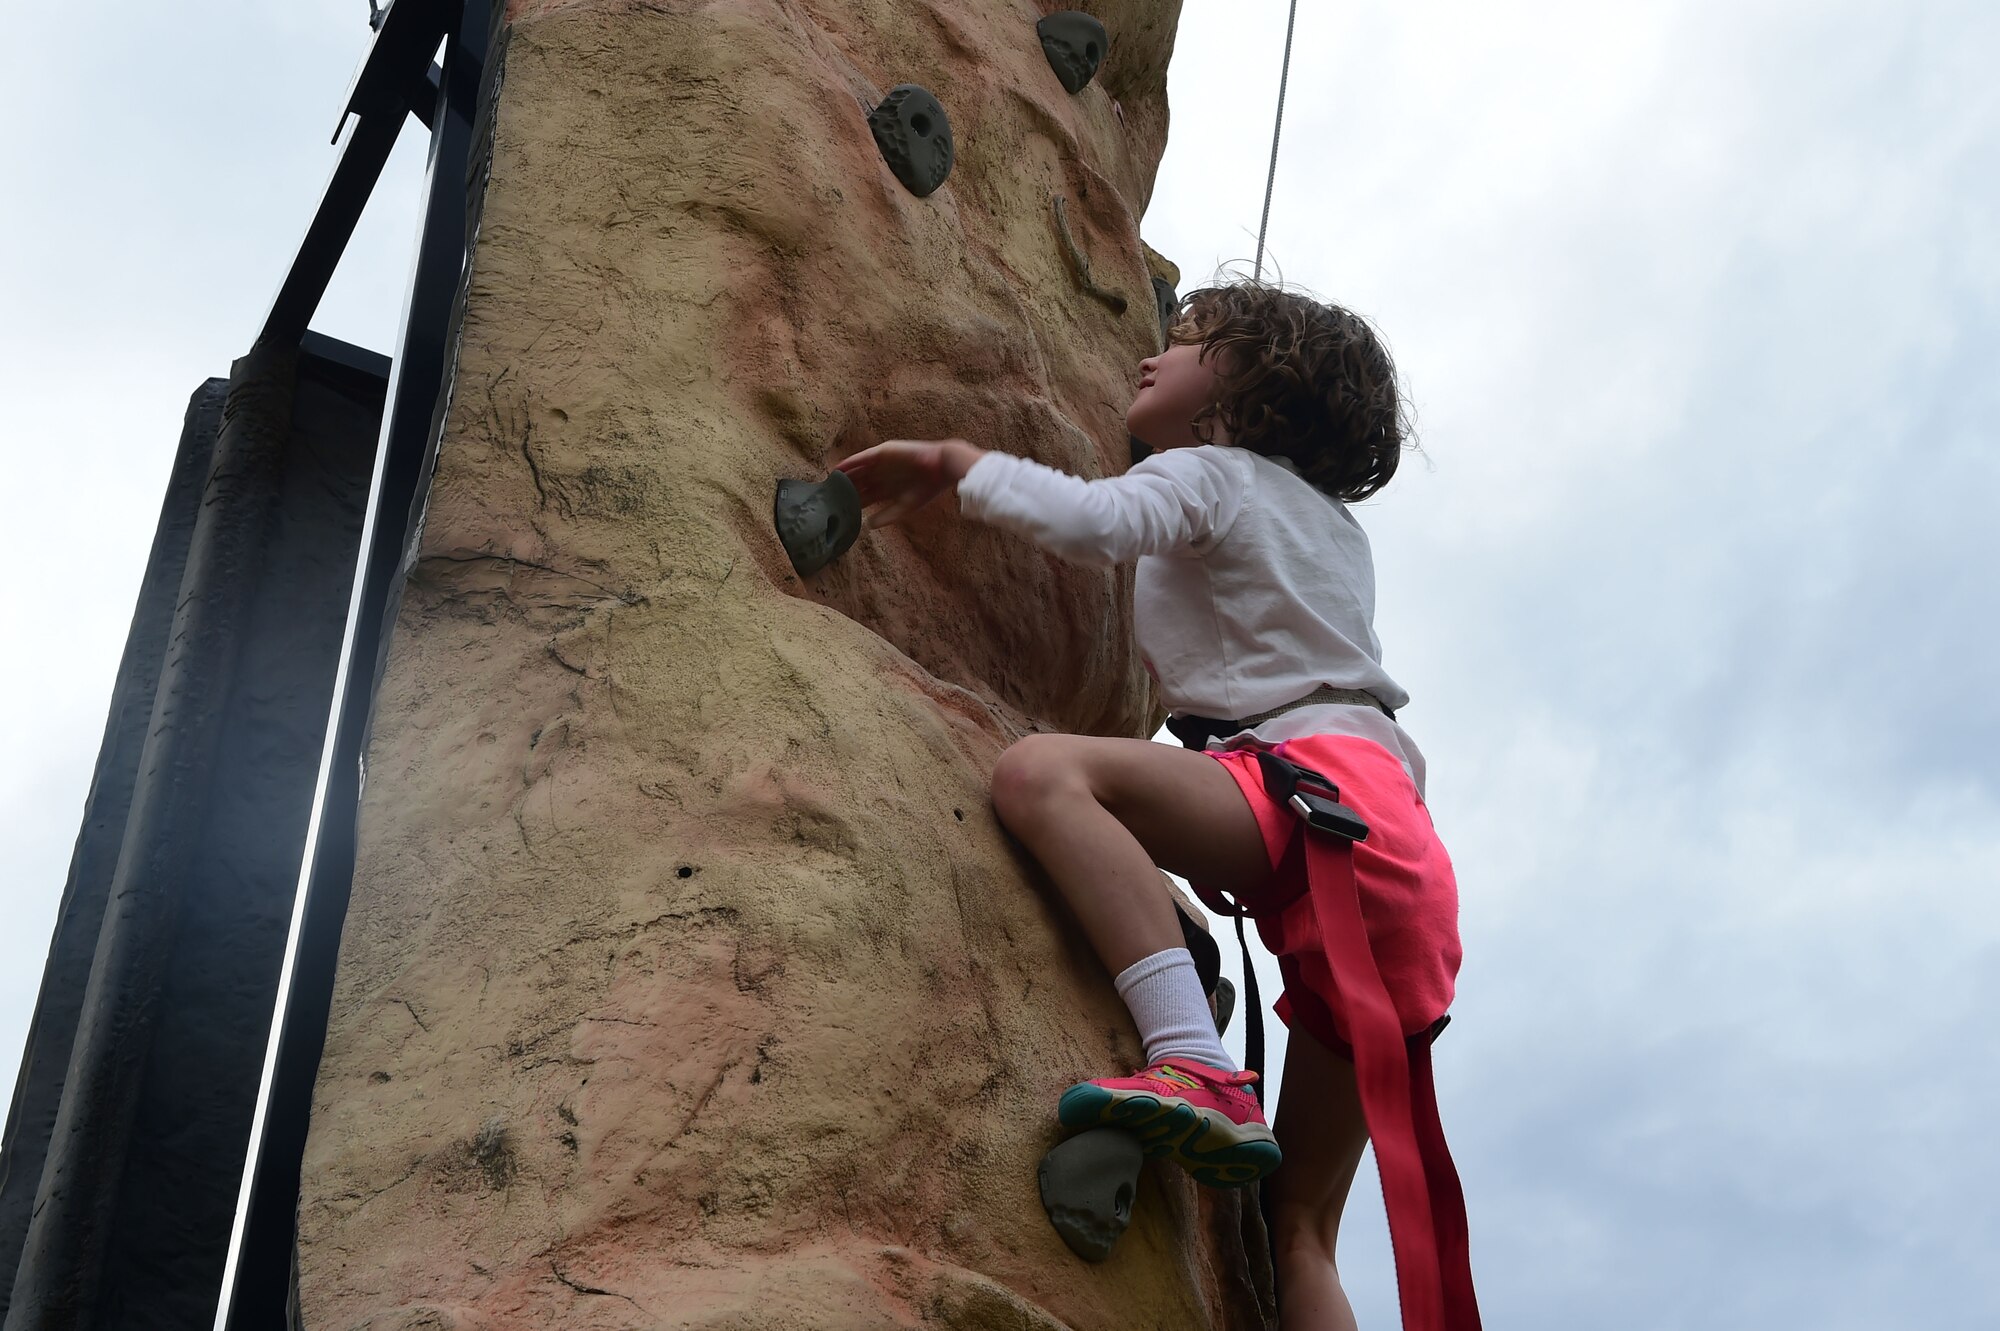 A girl climbs a rock wall during FunFest July 24, 2015, at Buckley Air Force Base, Colo. FunFest is an annual base-wide event that includes family-friendly games and activities, community involvement and local business sponsors. (U.S. Air Force photo by Airman 1st Class Luke W. Nowakowski/Released)